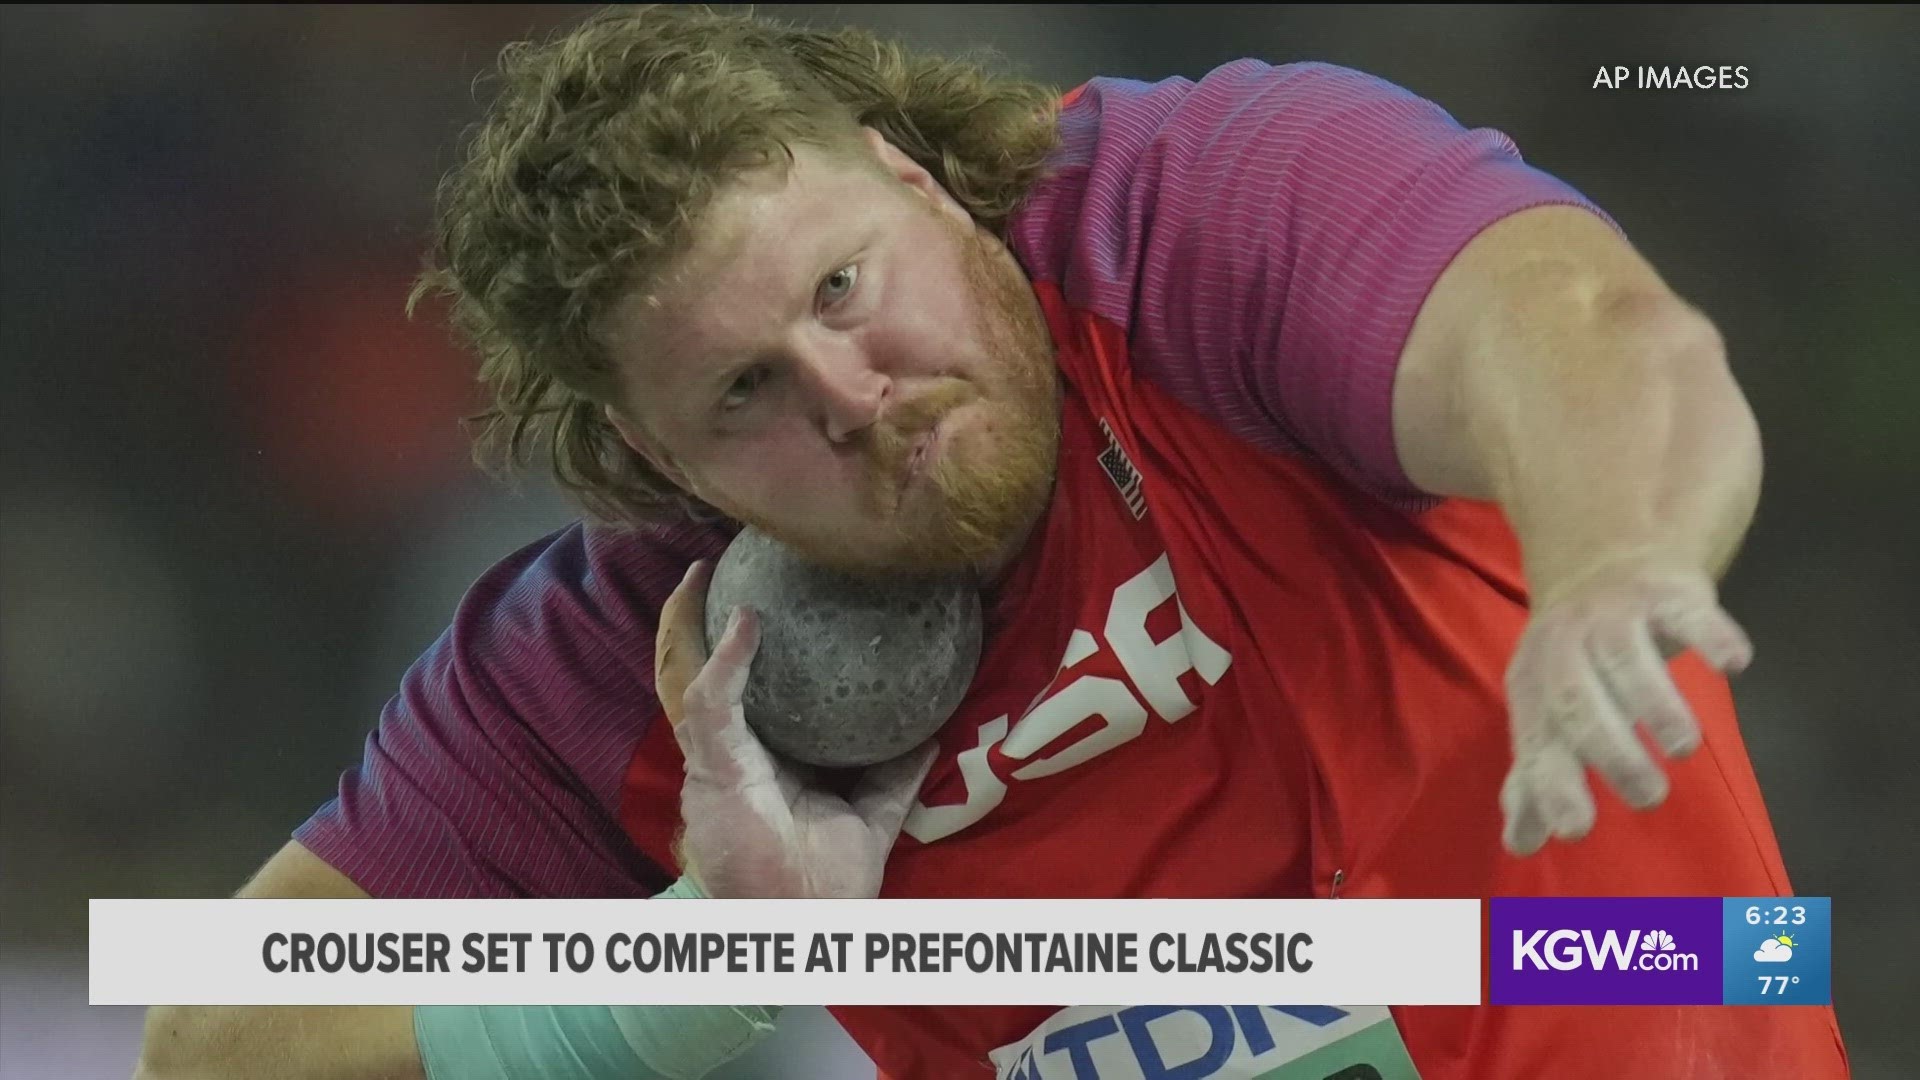 Crouser is a Barlow High School graduate and world record holder in the shot put. He competes on Sunday afternoon.